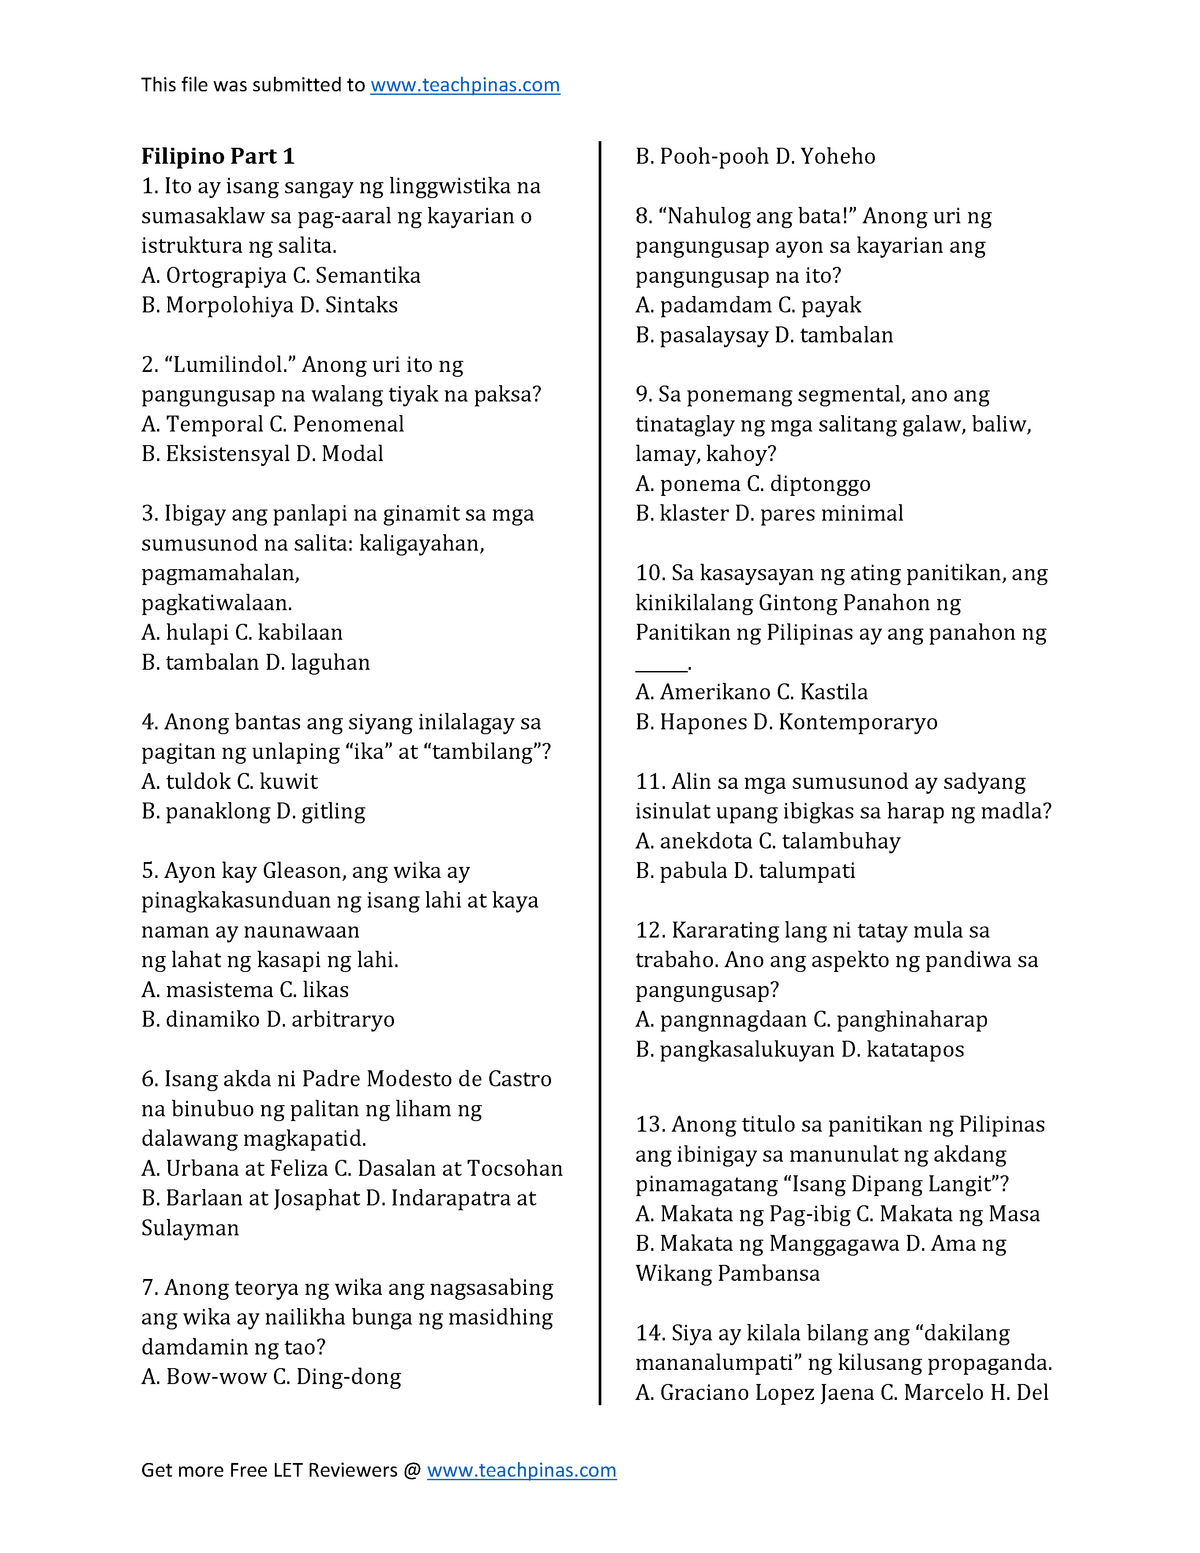 Part 1 Filipino - This serves as a practice materials in reviewing for ...